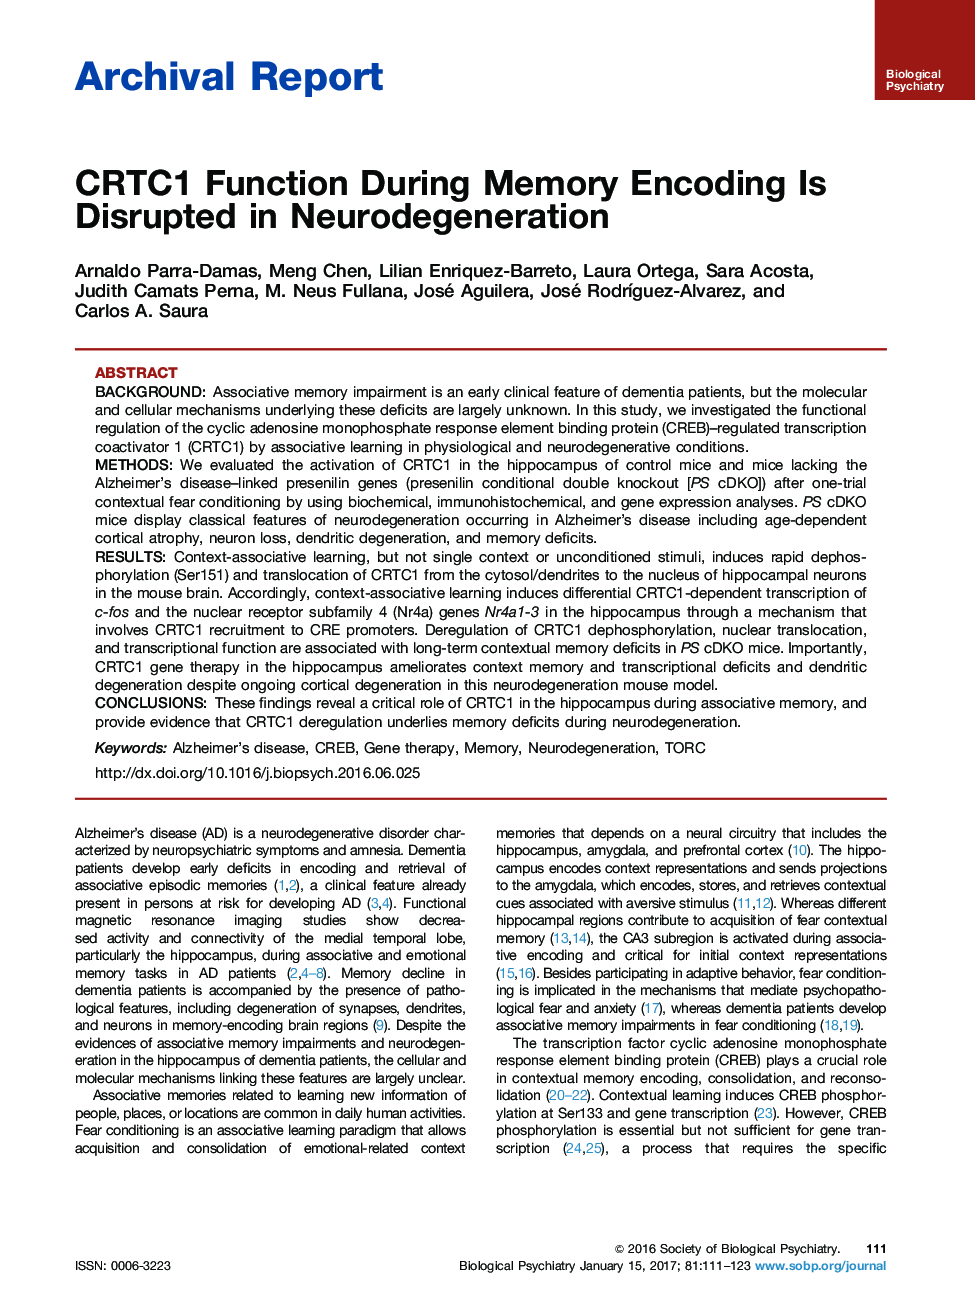 Archival ReportCRTC1 Function During Memory Encoding Is Disrupted in Neurodegeneration